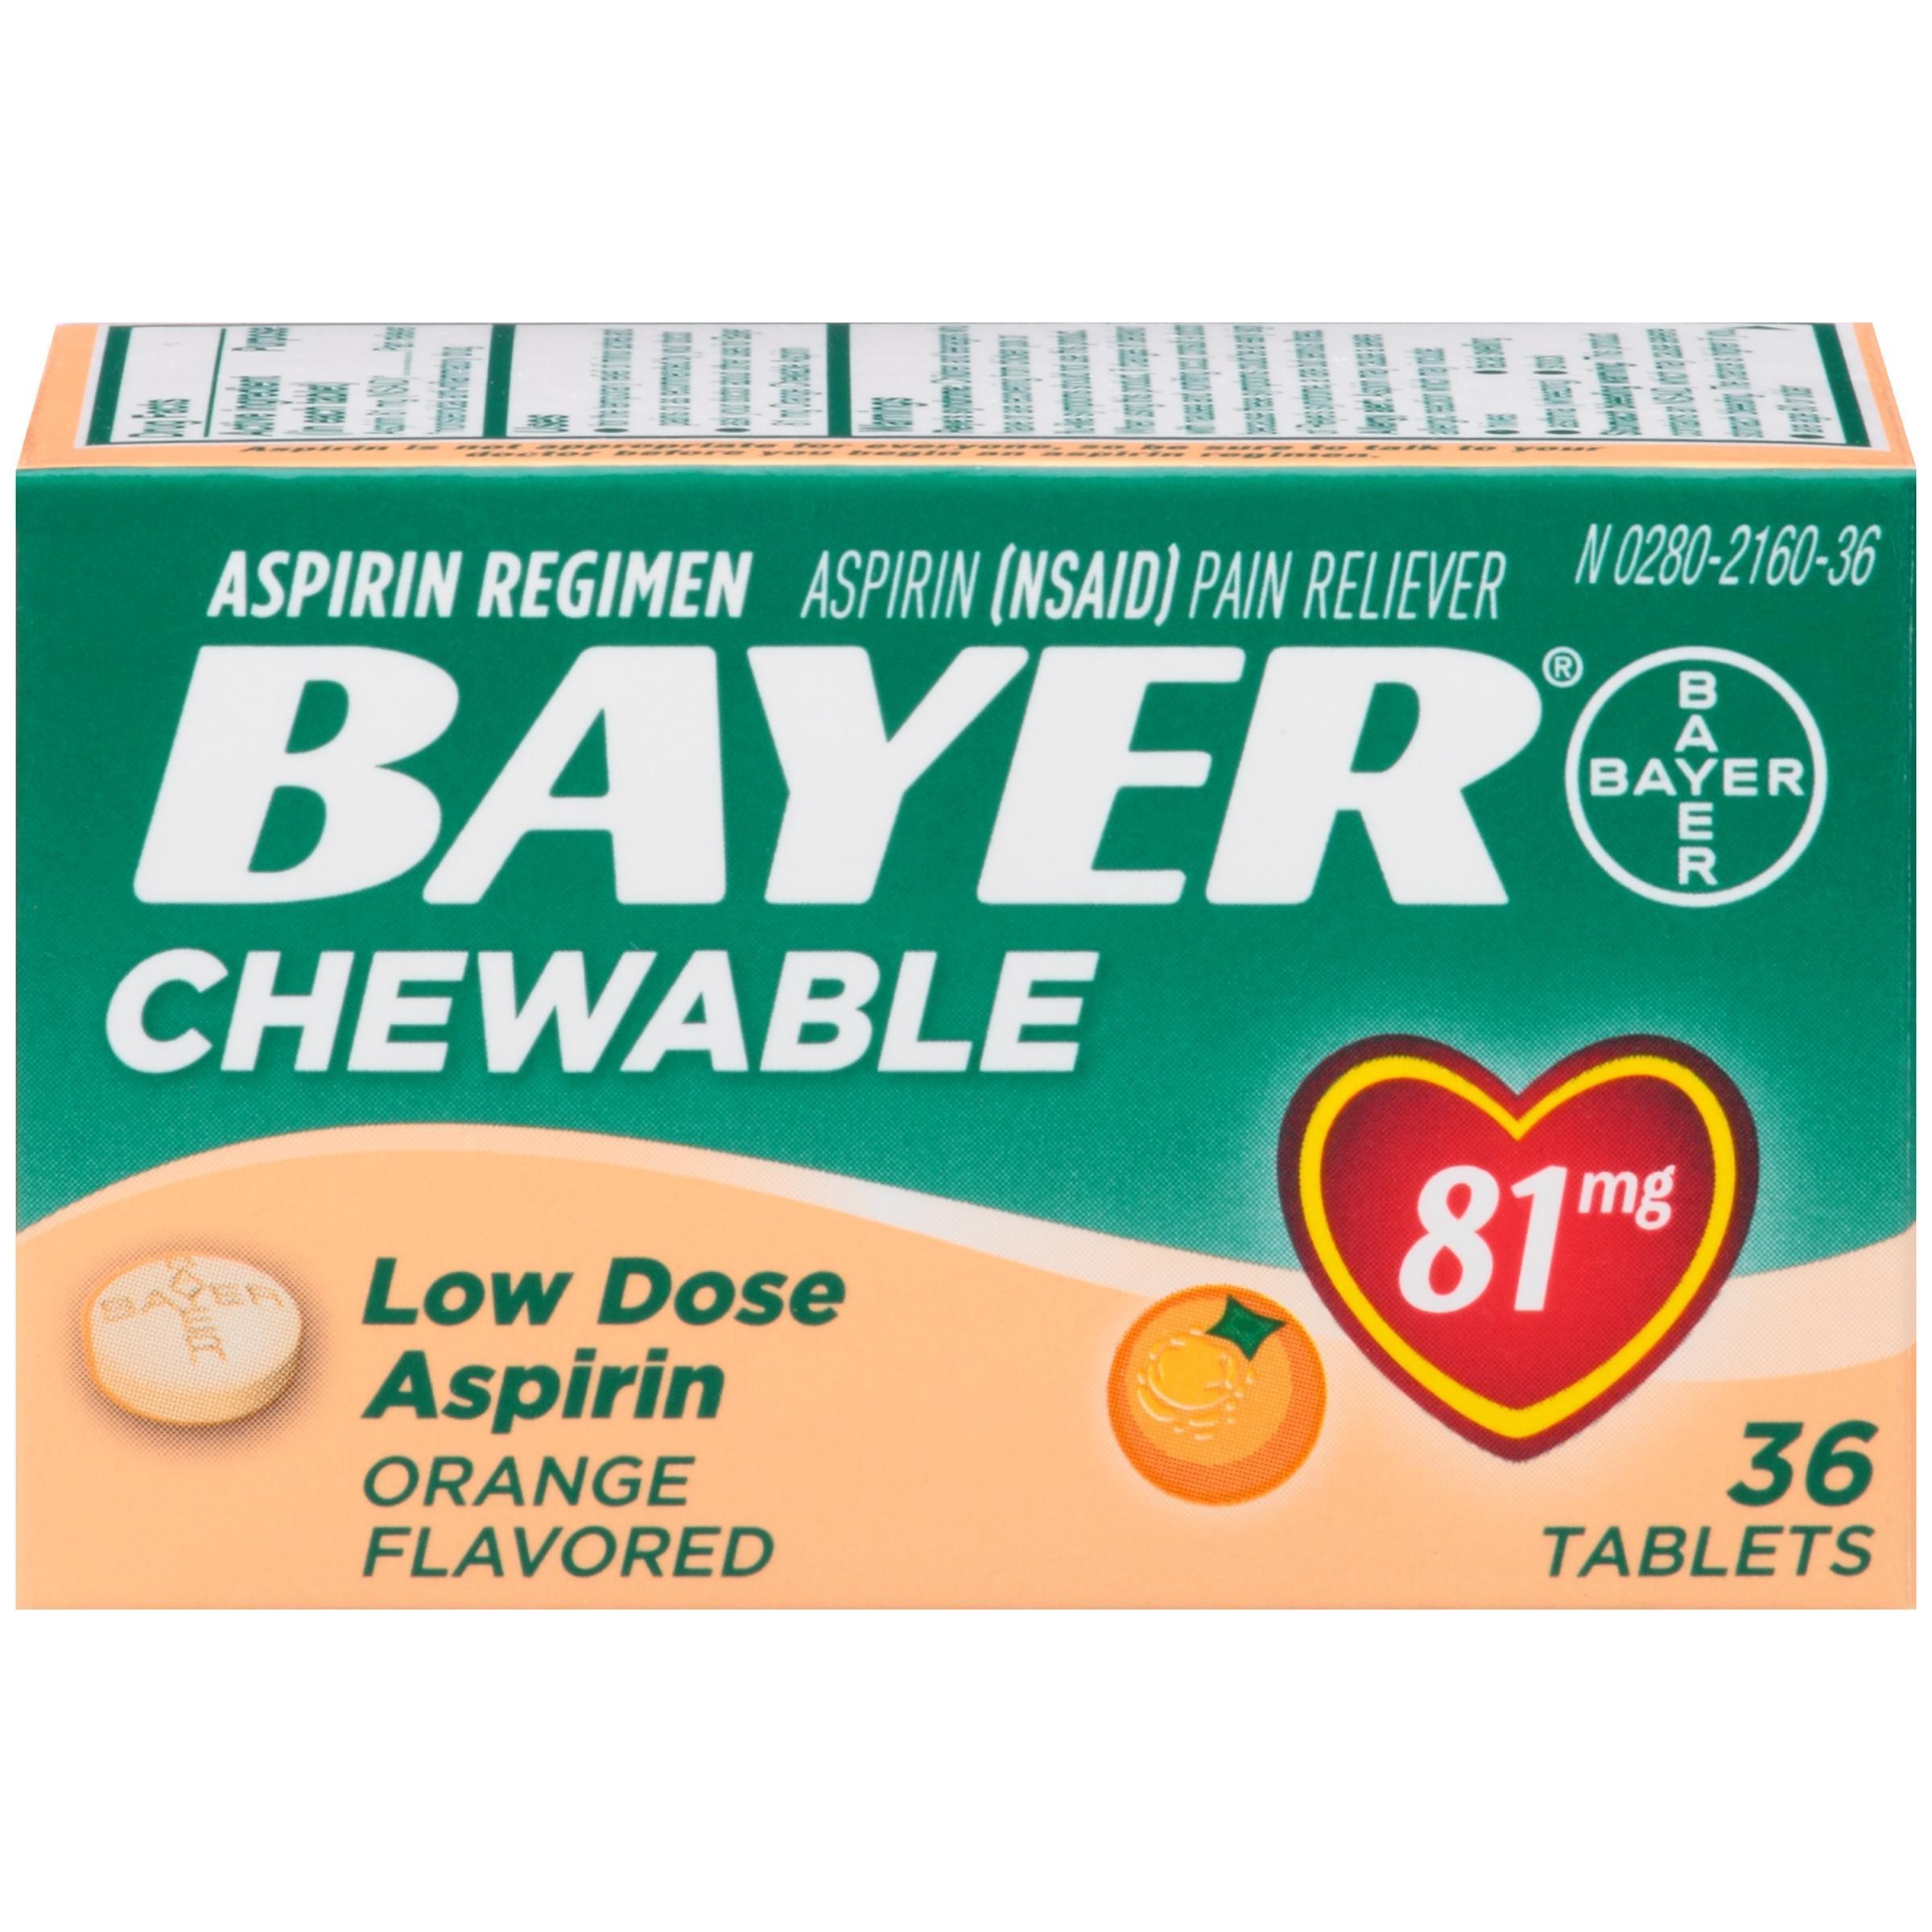 Bayer Aspirin, Low Dose, 81 Mg, Chewable, Tablets, Orange Flavored - 36 Ct